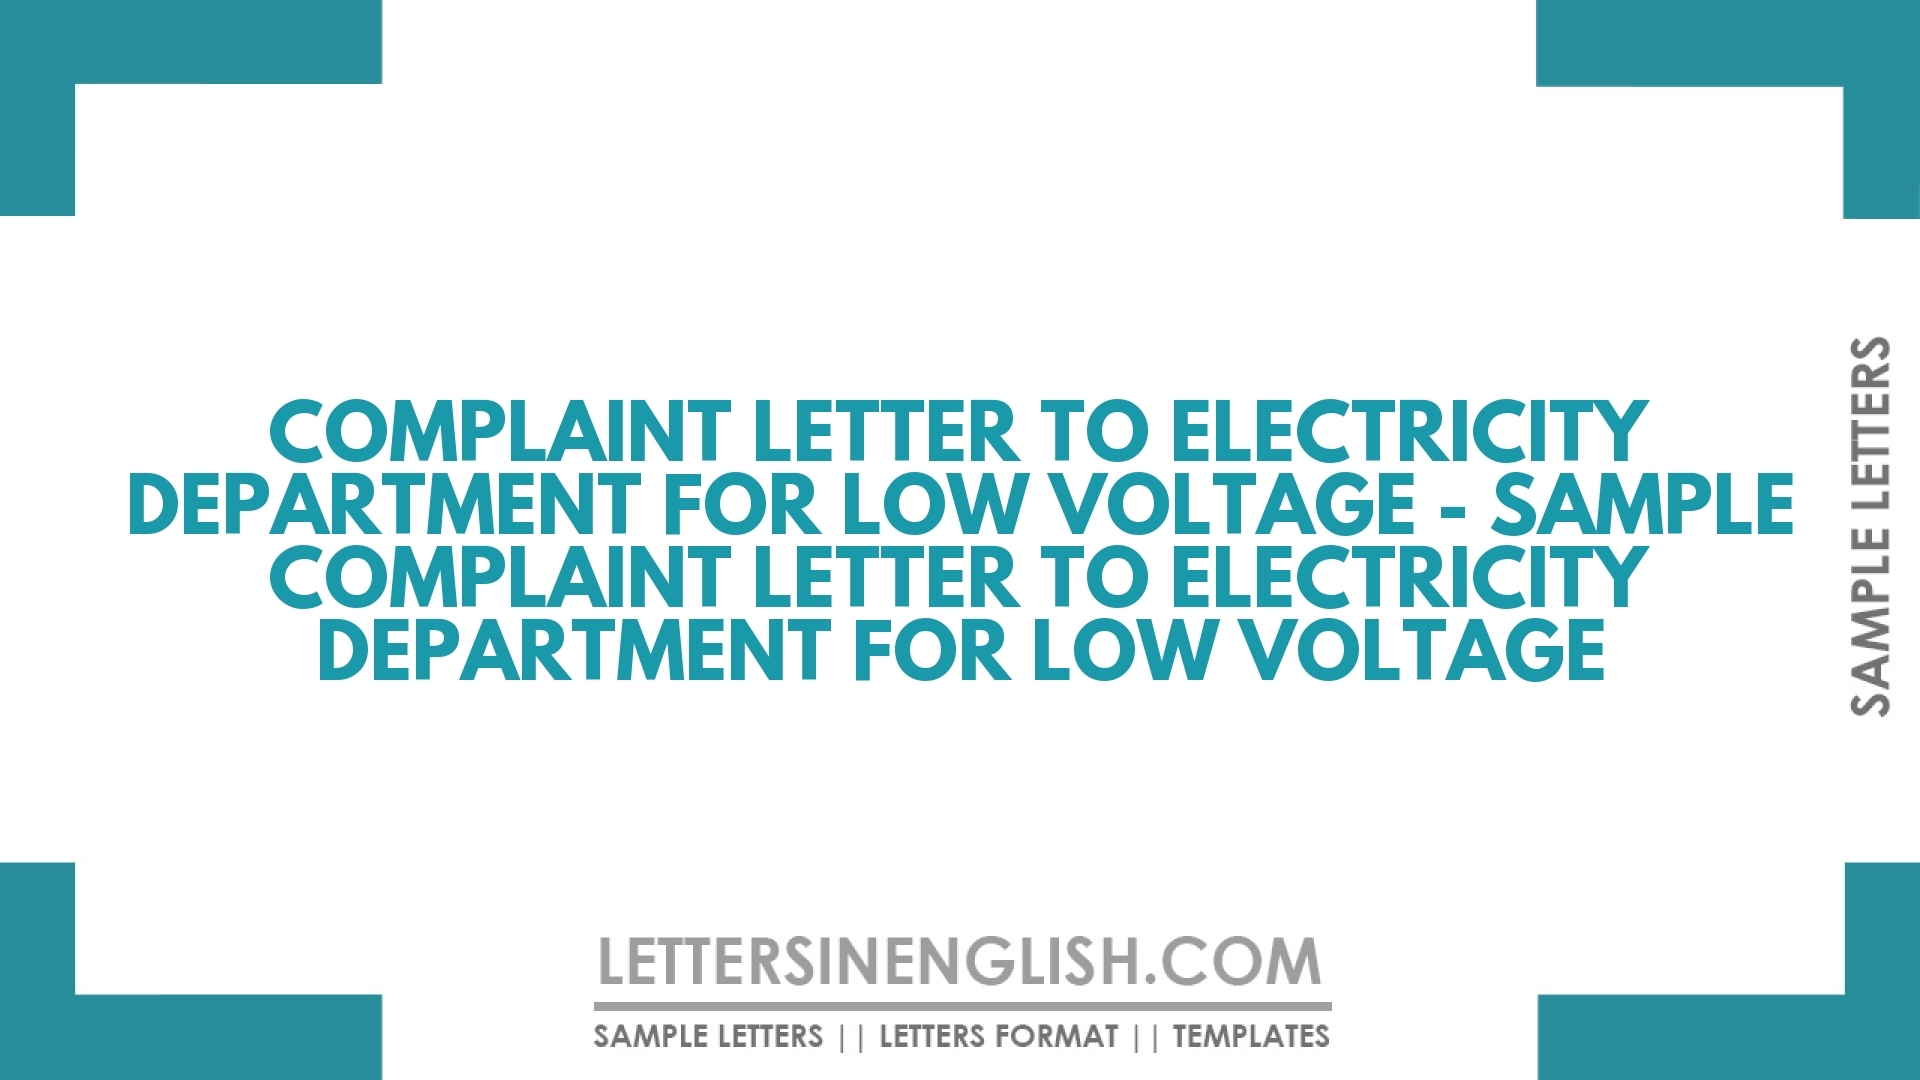 Complaint Letter to Electricity Department for Low Voltage – Sample Complaint Letter to Electricity Department for Low Voltage